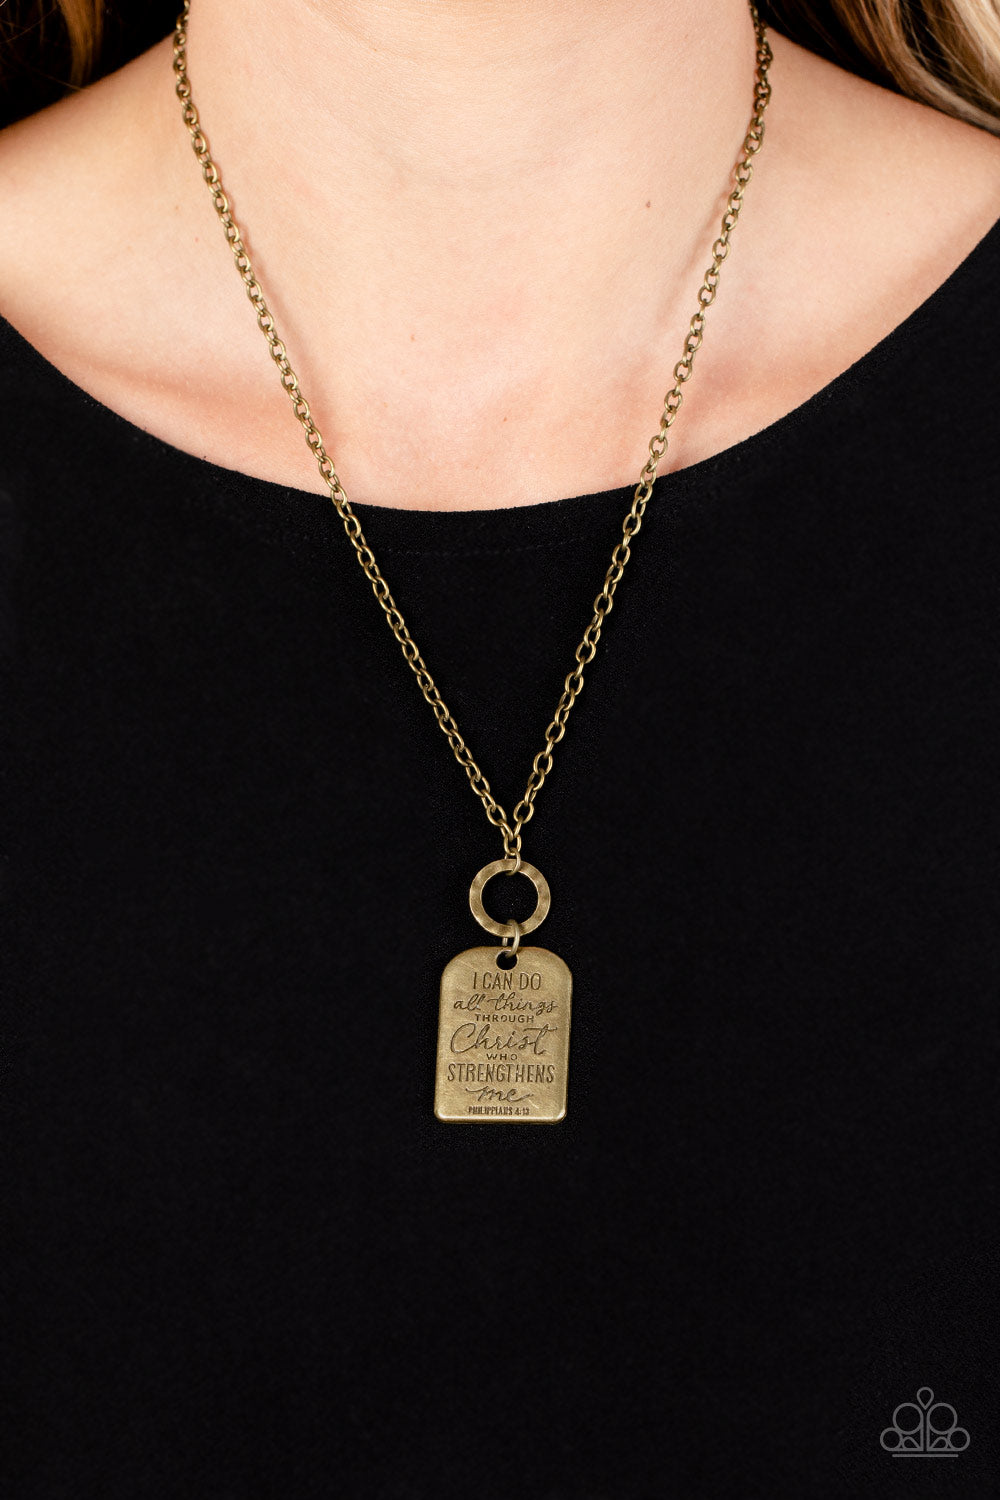 Persevering Philippians - Brass Paparazzi Necklace